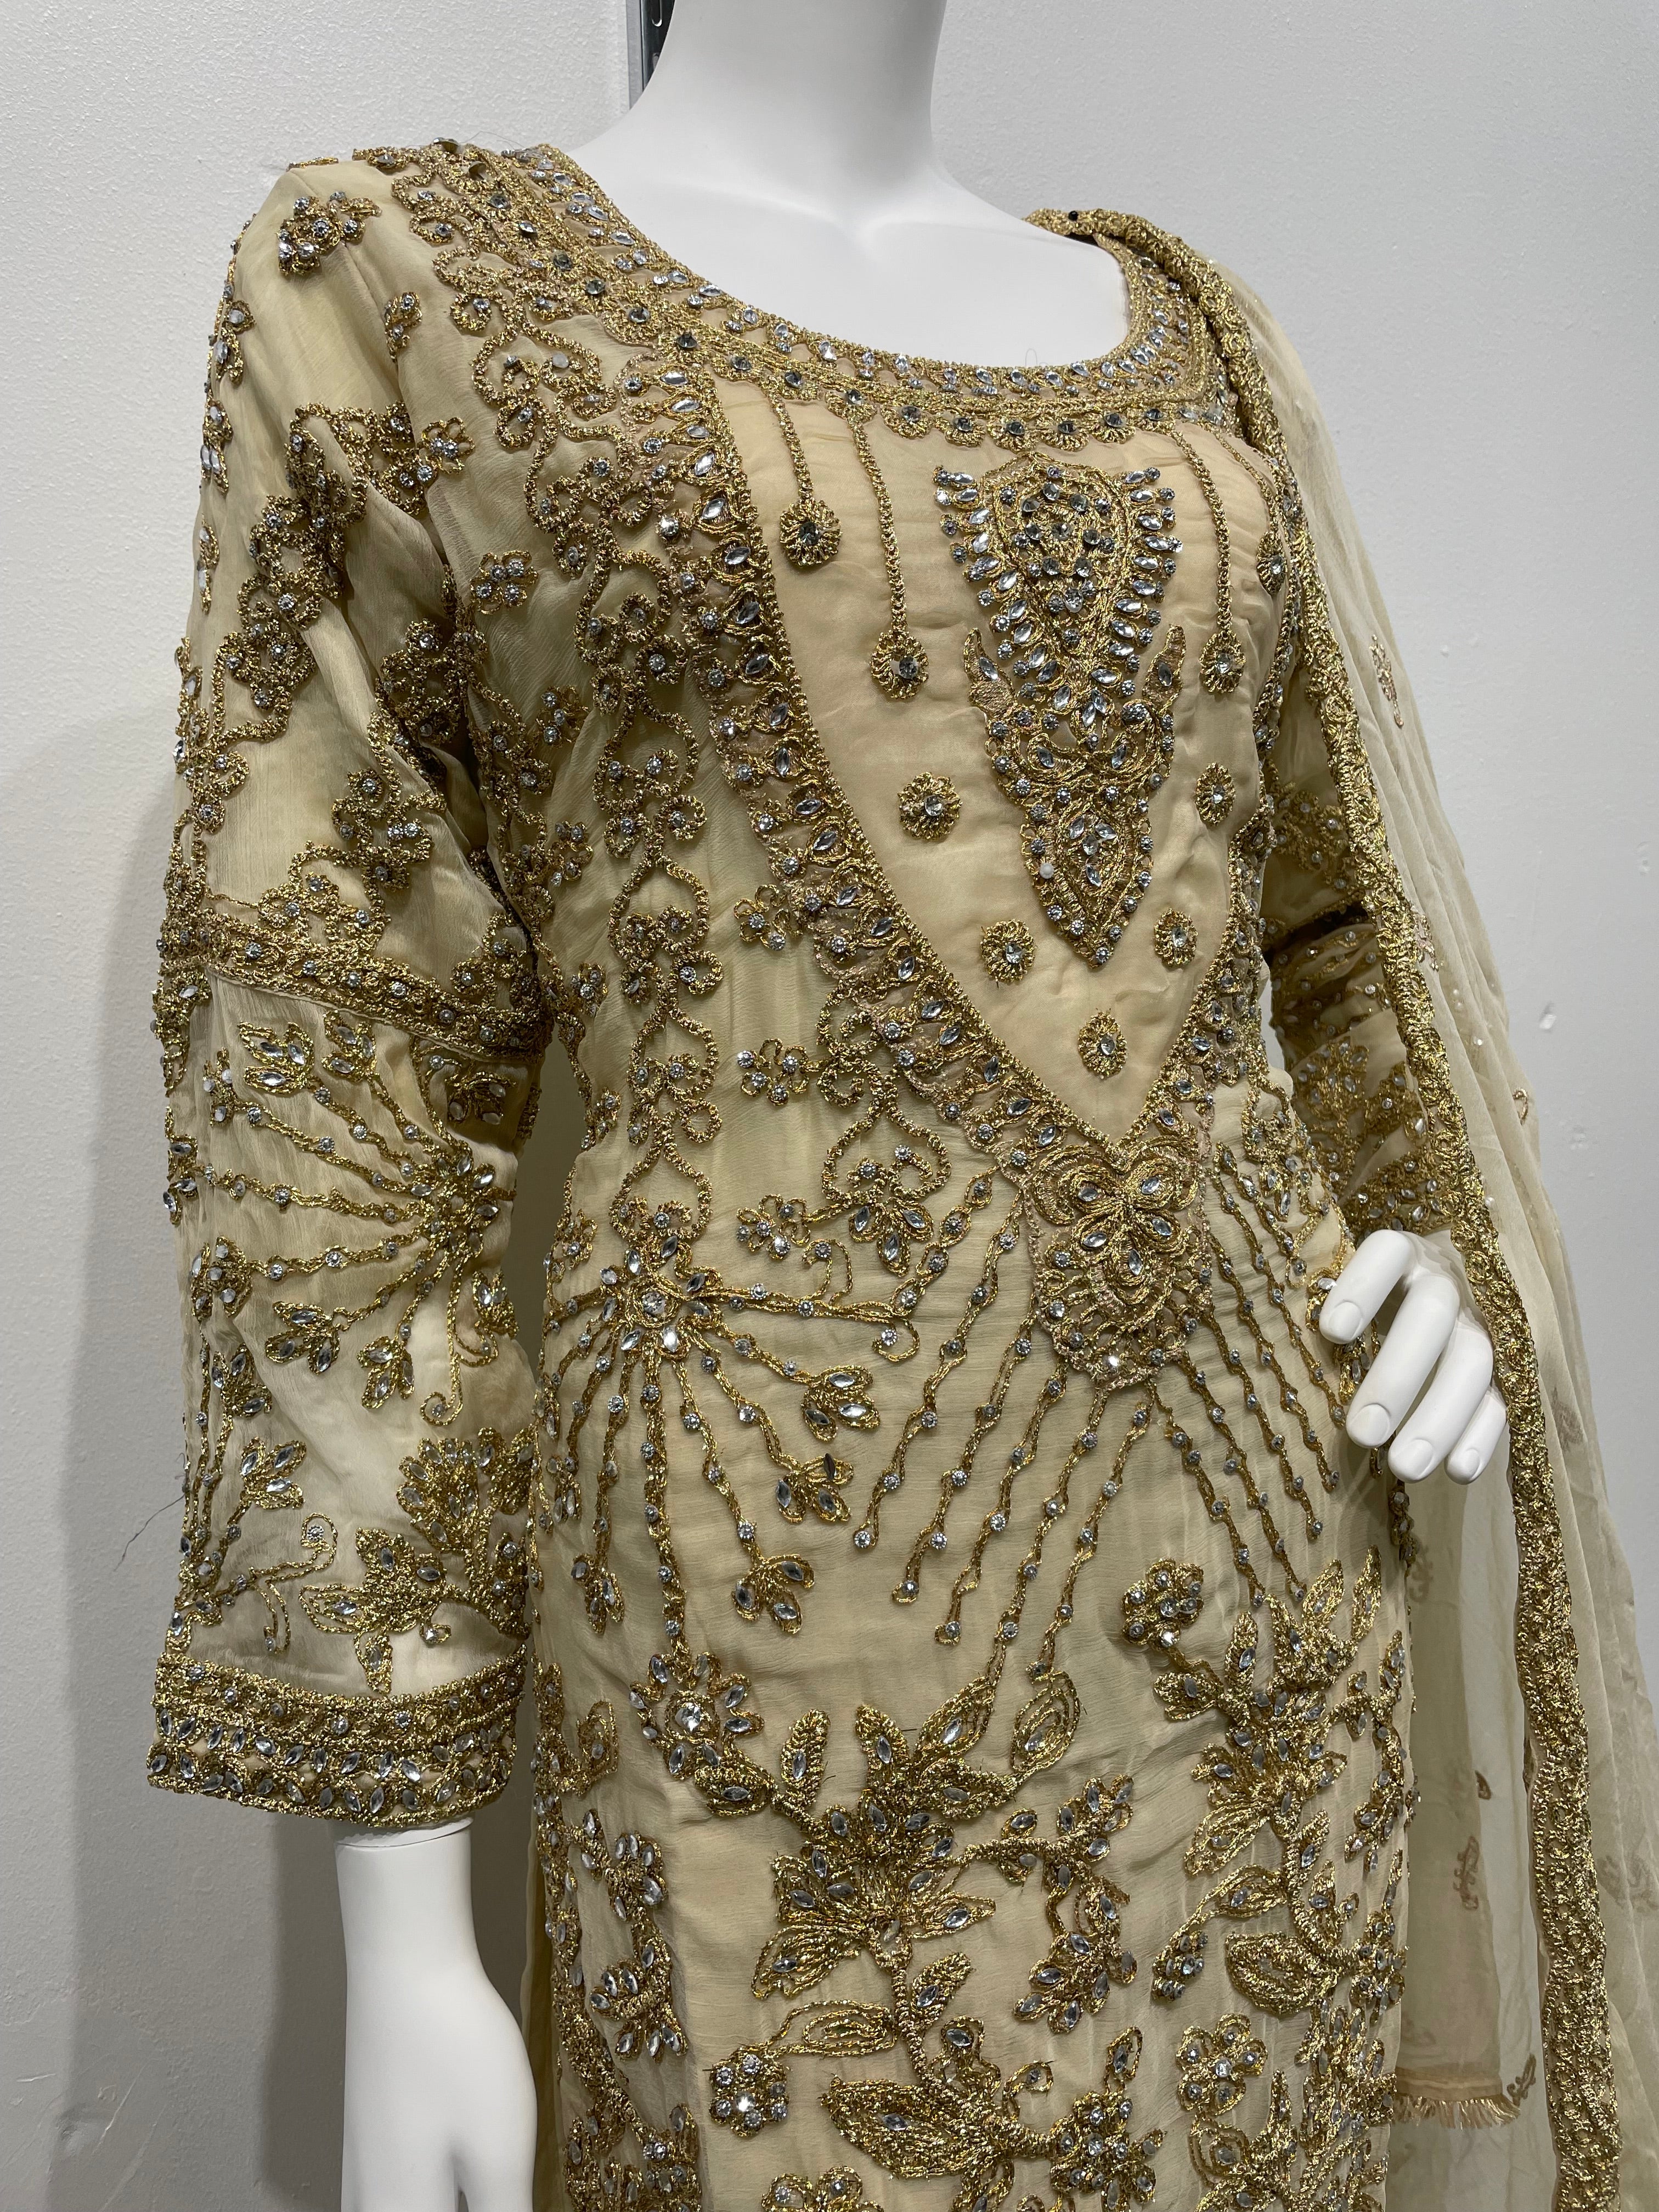 Gold Chiffon Shalwar Kameez with Gold Embroidery